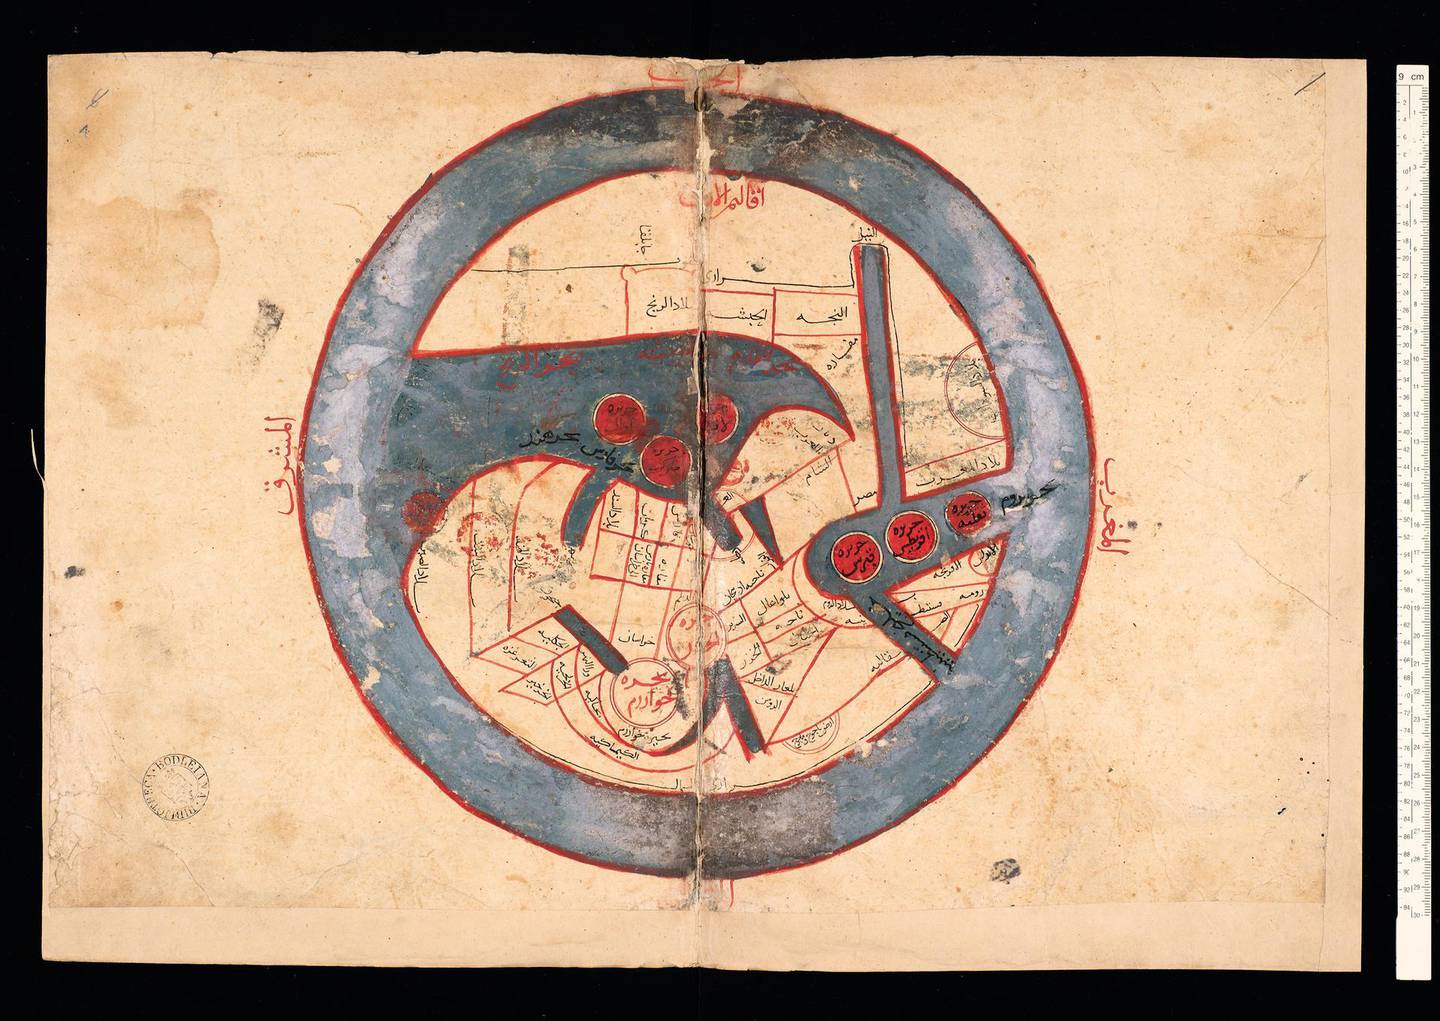 Dating from 1297, this is a Persian copy of a 10th-century world map by the little-known map-maker Muhammed al-Istakhri. Image: Copy of al-Istakhri, world map, 1297. MS. Ouseley 373, fols. 3b–4a © Bodleian Libraries, University of Oxford